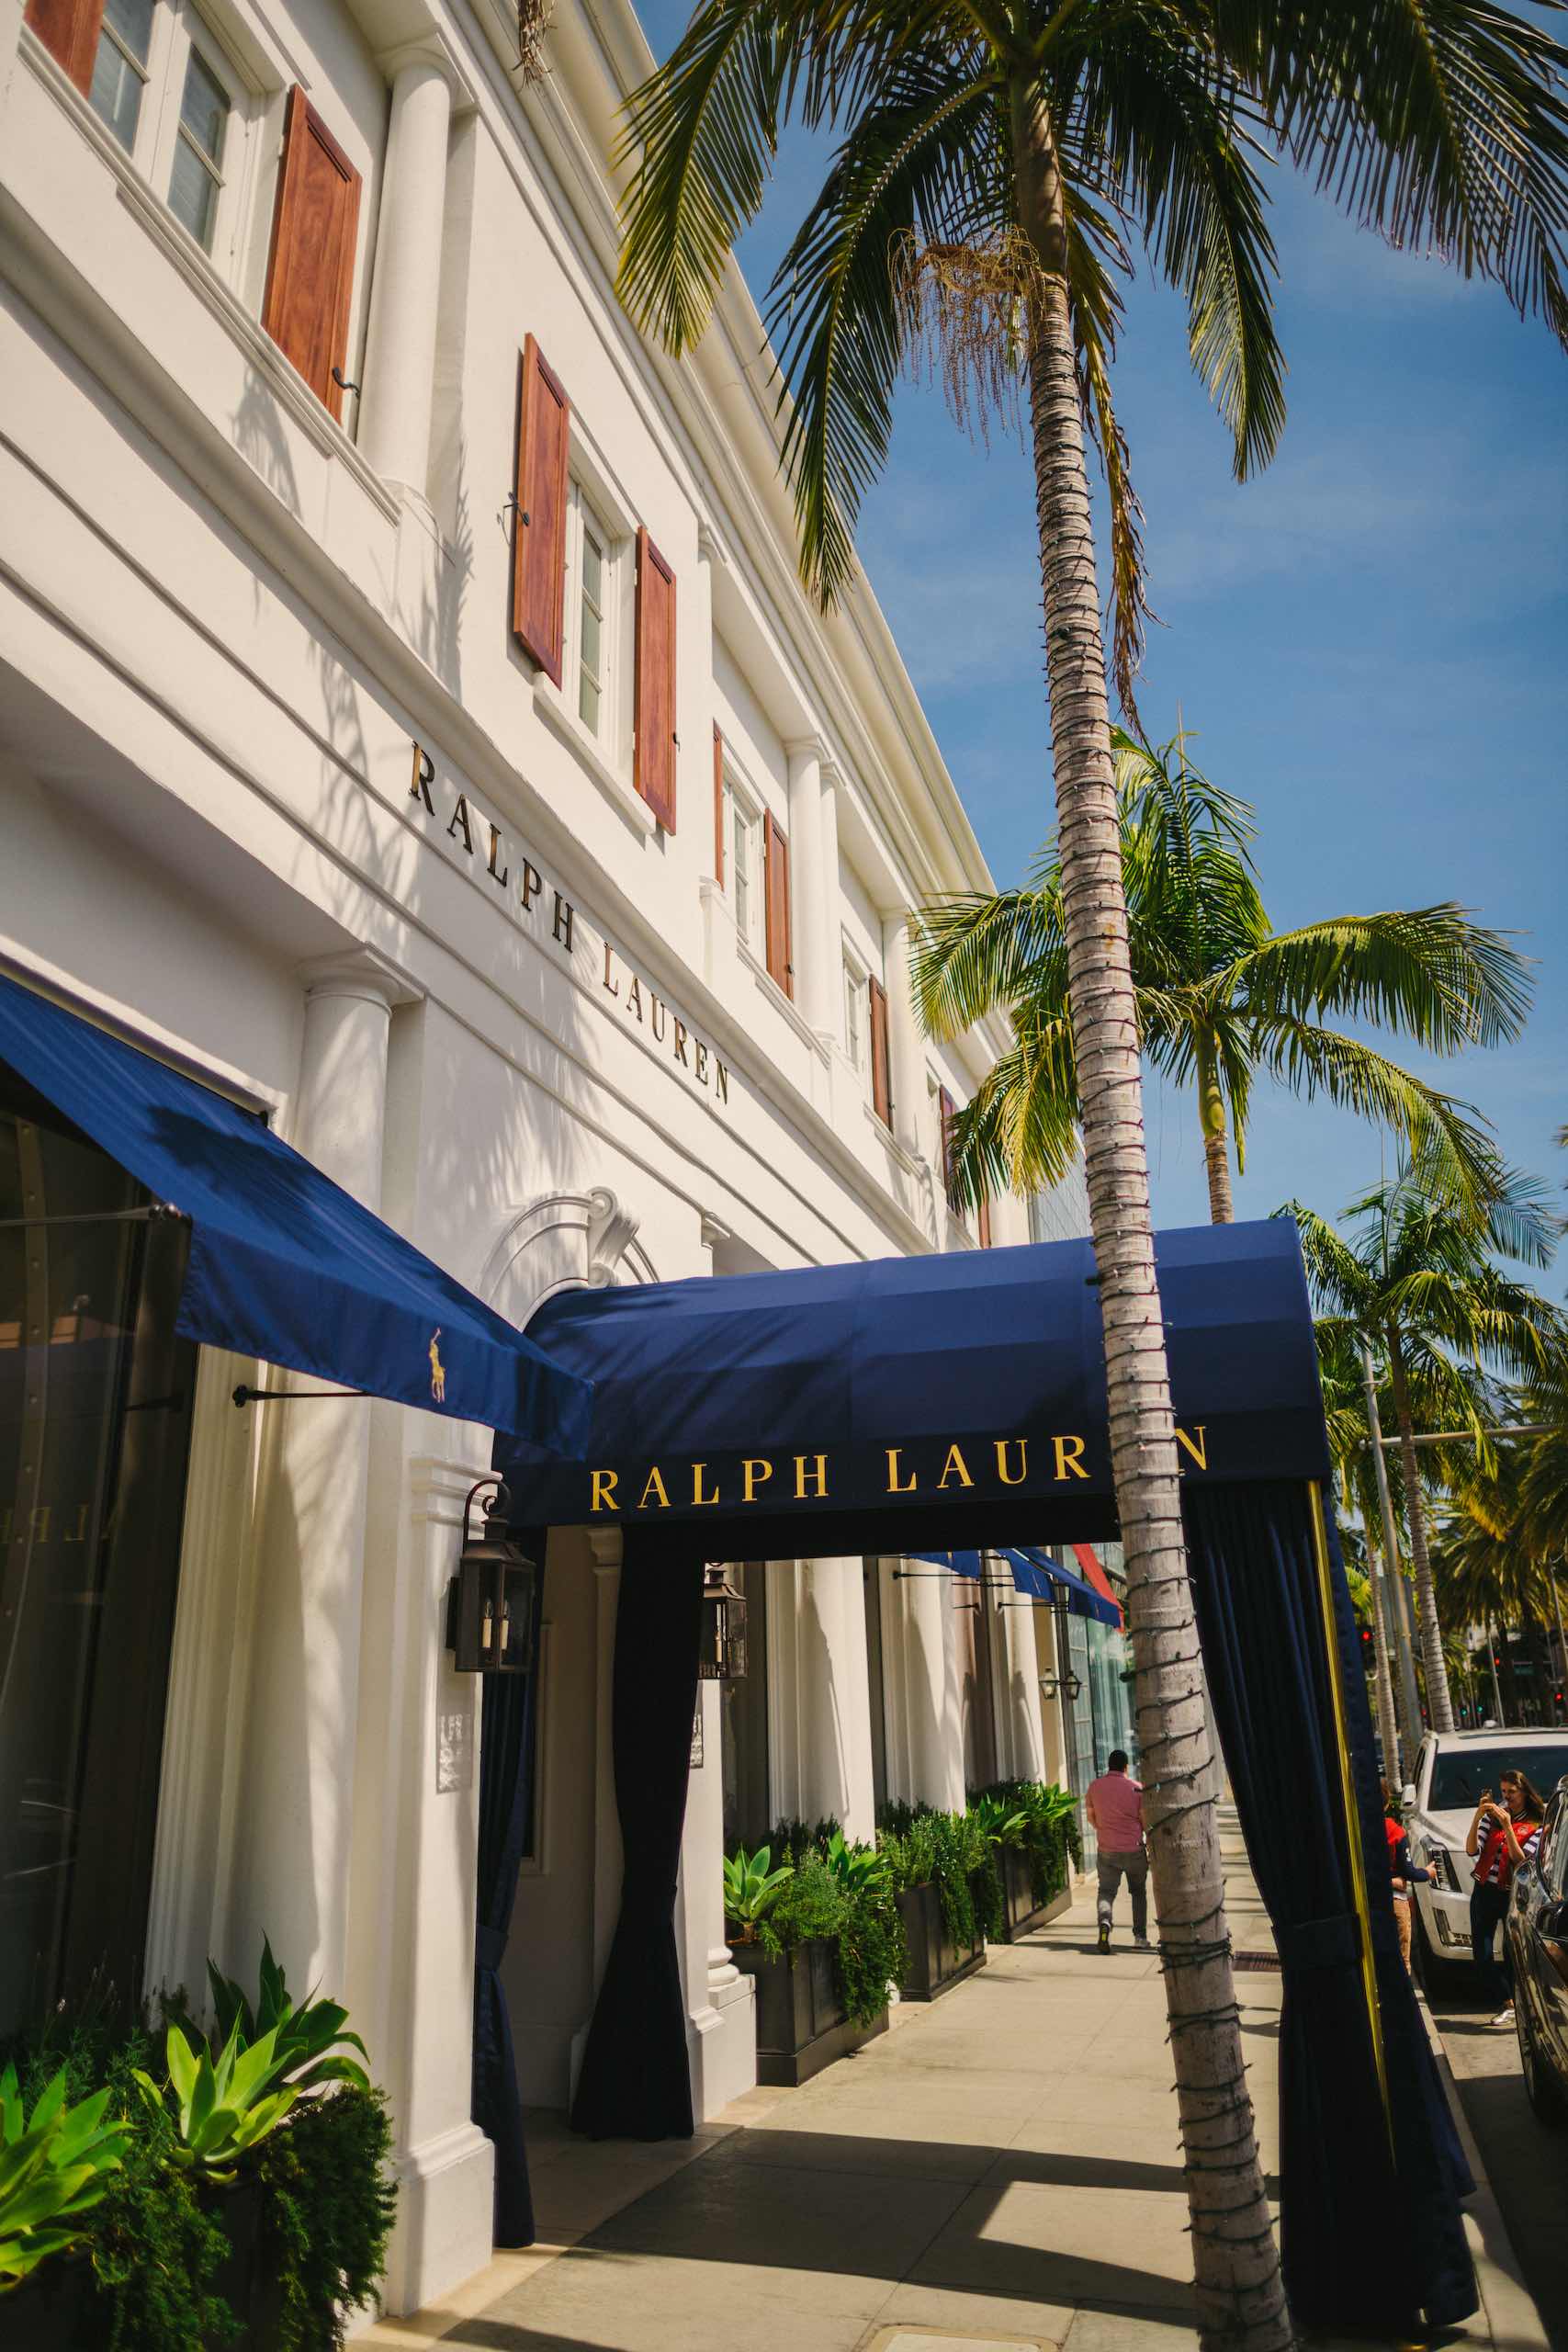 Peretti Italy branding and photography Closeup of Ralph Lauren storefront with palm tree near it